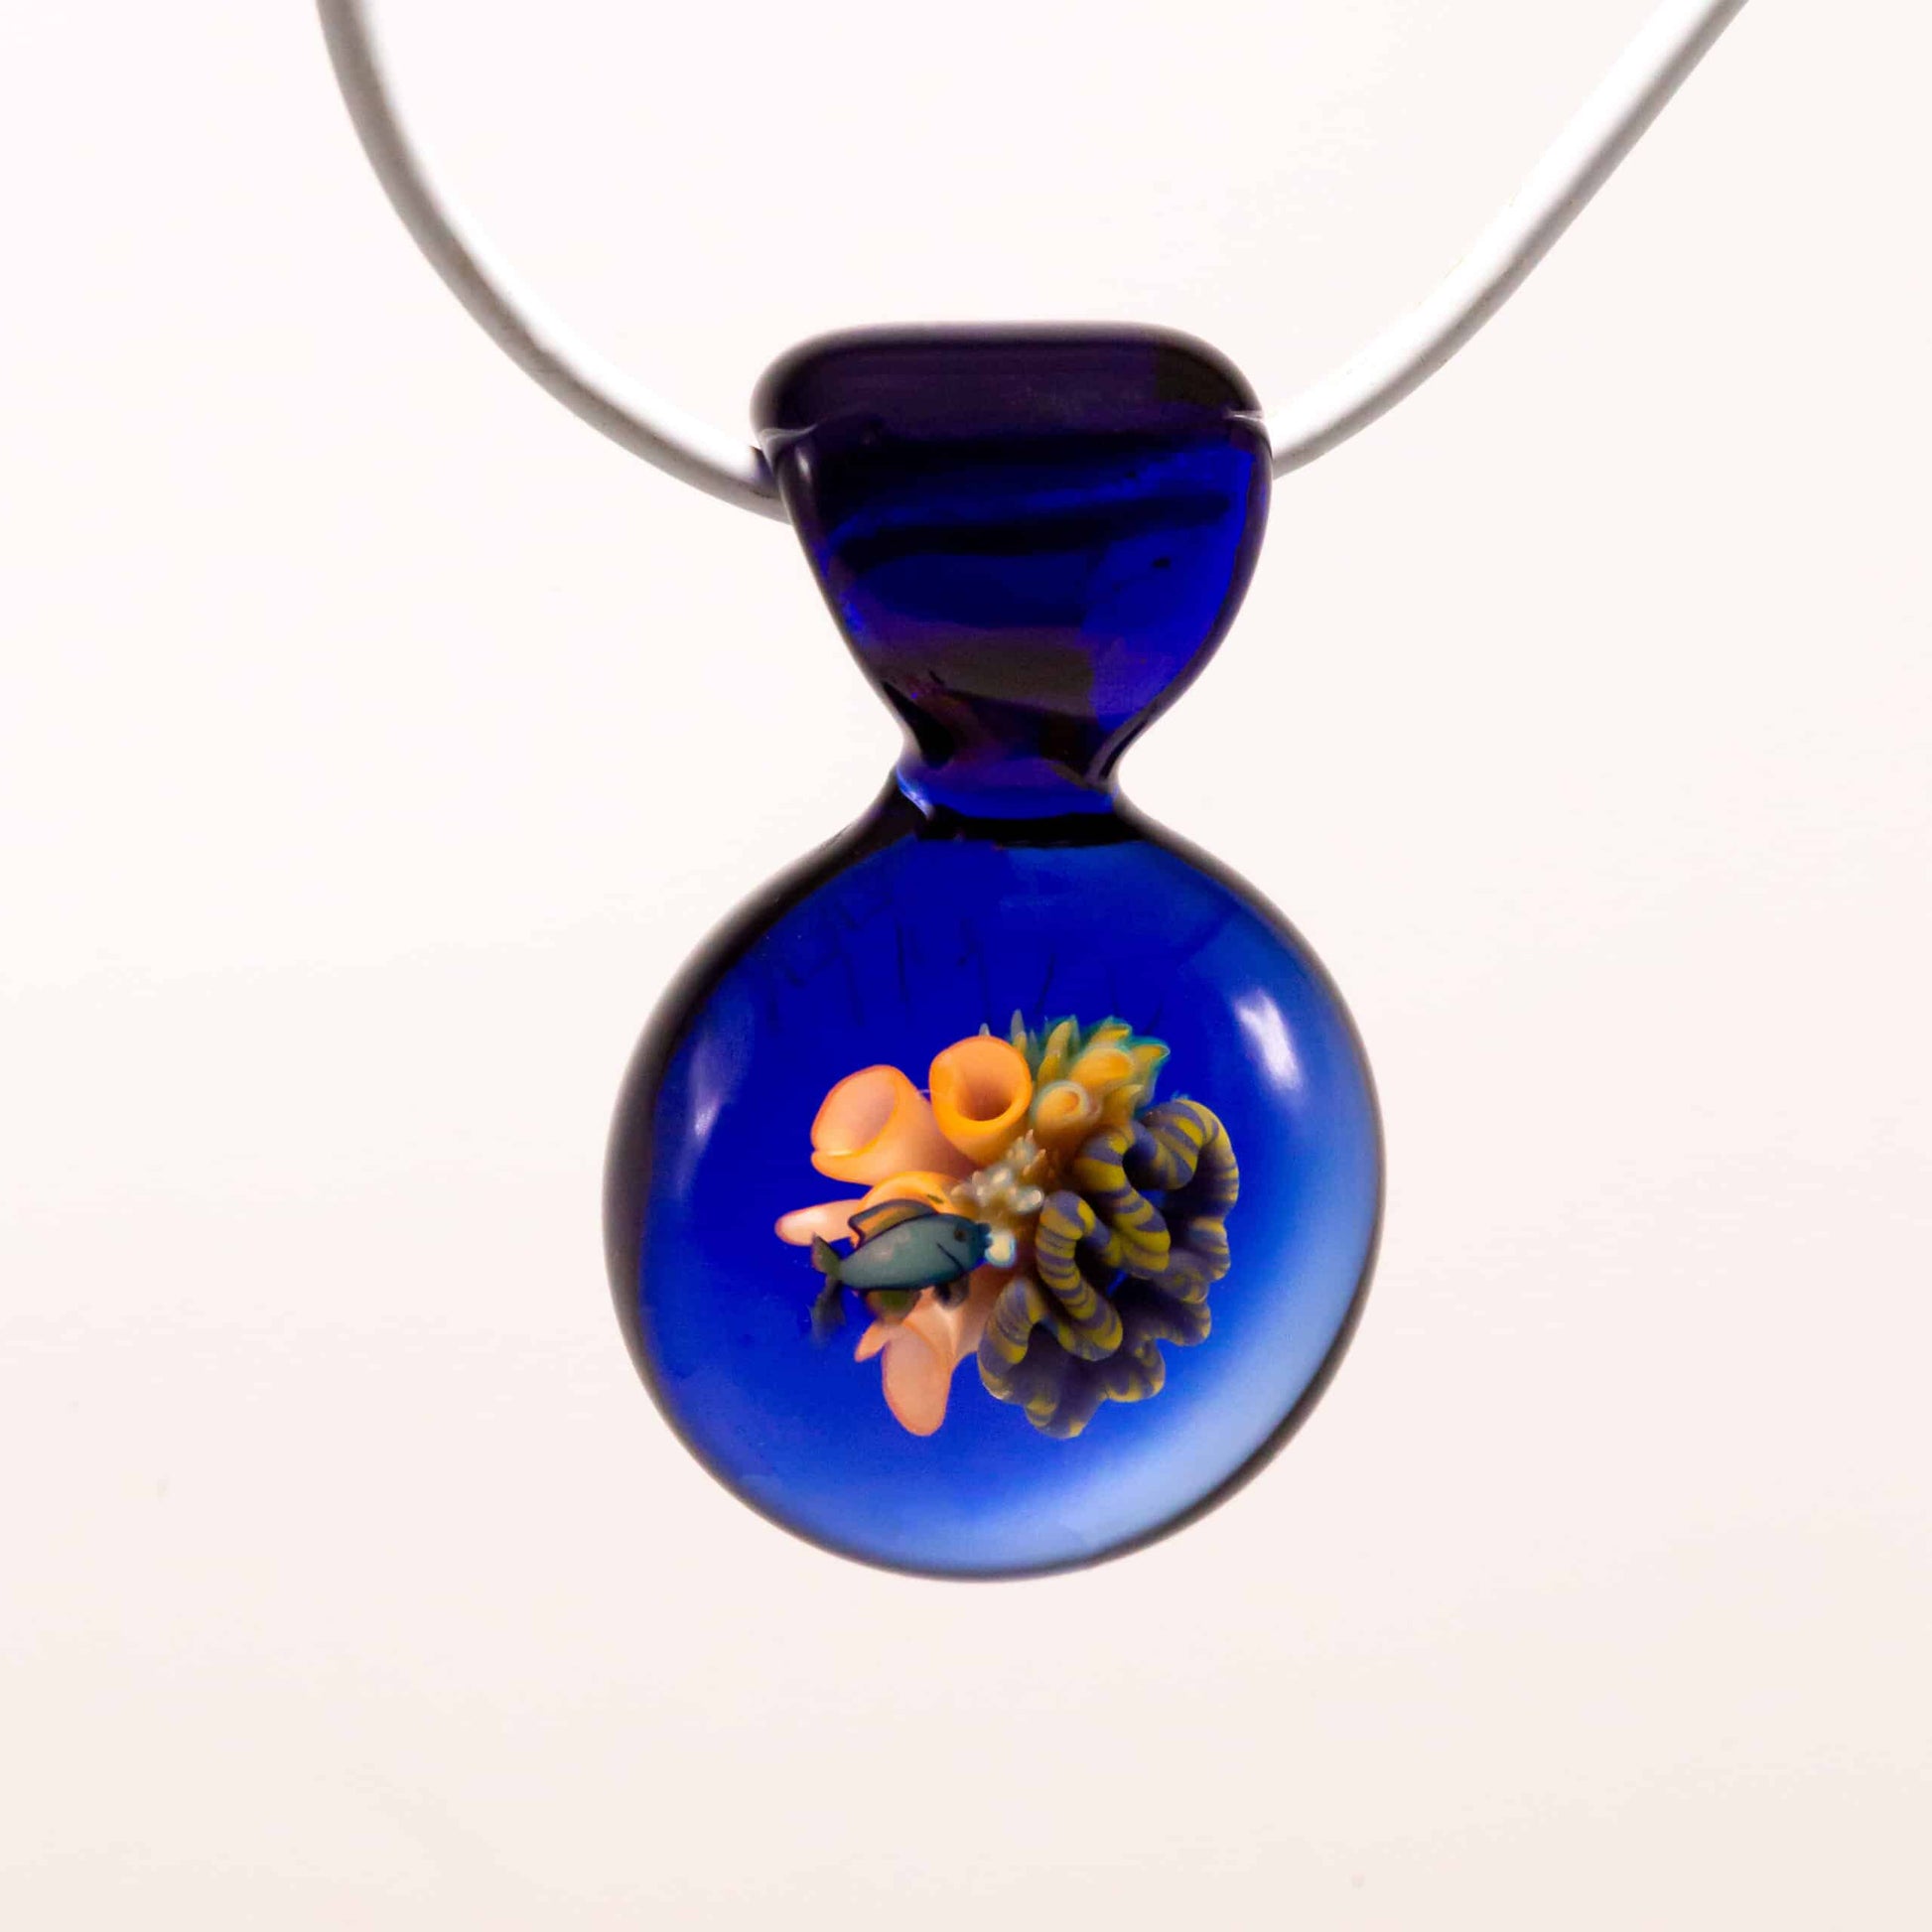 meticulously crafted glass pendant - Coral Reef Pendant (BLUE, FISH) #5 BY KIMMO